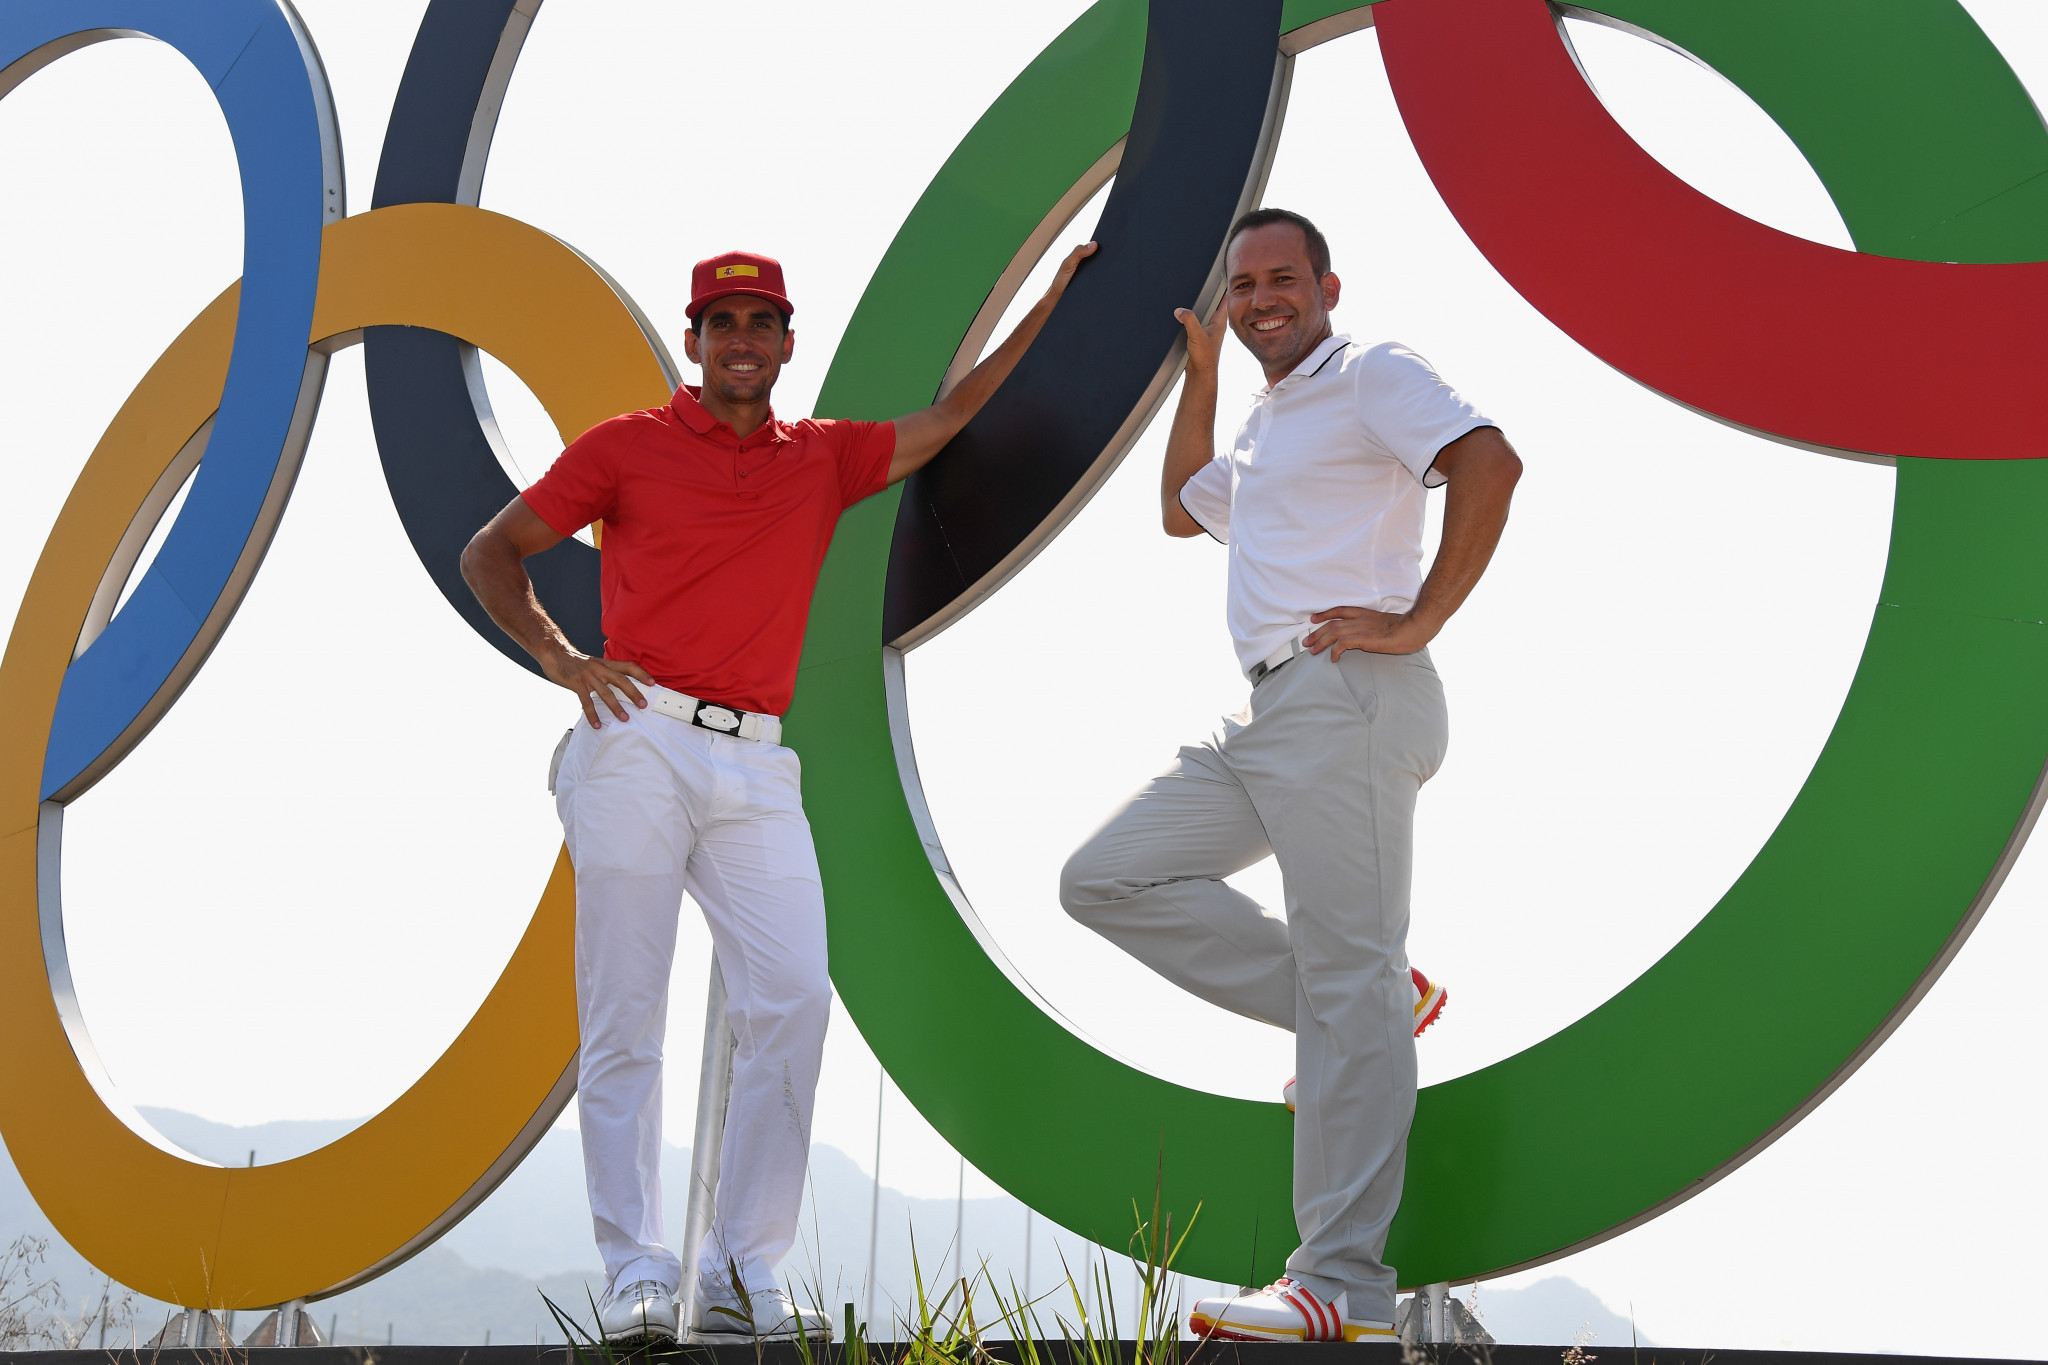 The PGA Tour has announced that its season will work around the Tokyo 2020 Olympics ©Getty Images